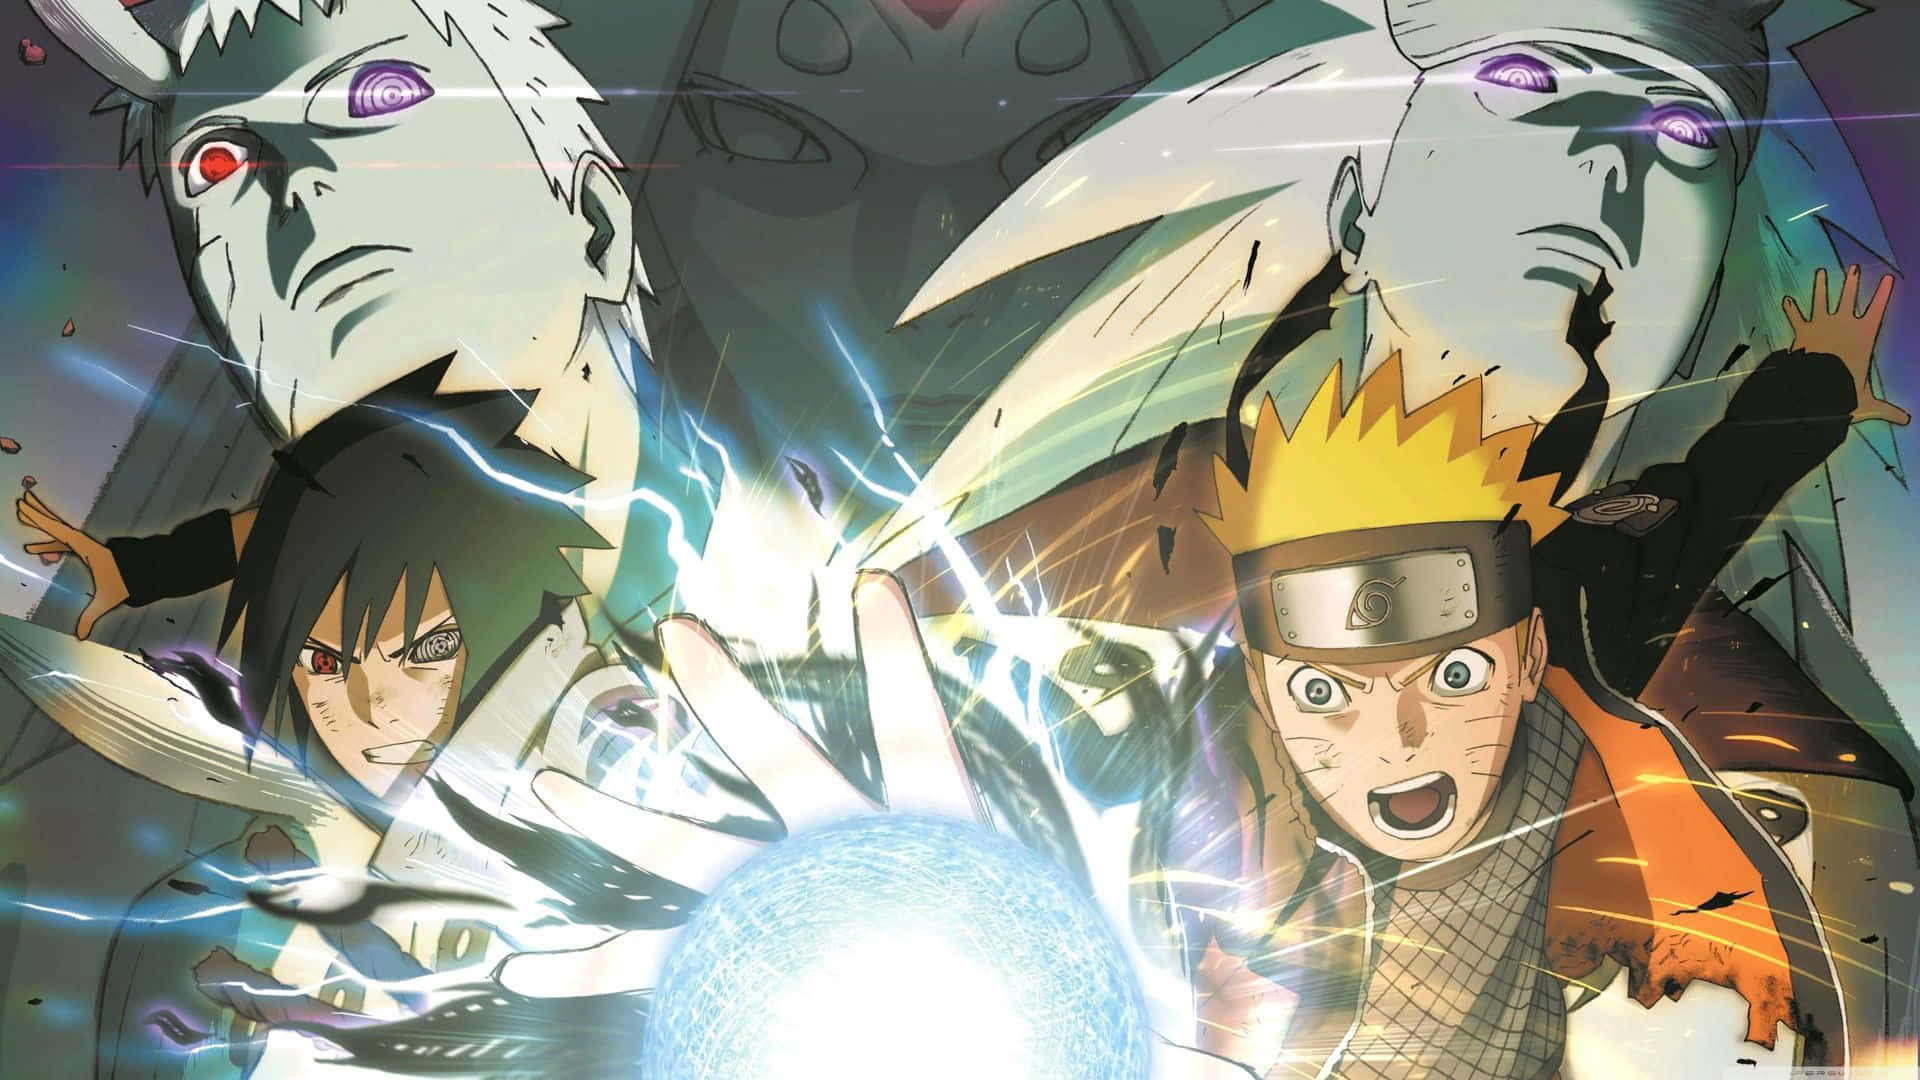 "Blast off with Naruto and the latest Macbook Pro" Wallpaper